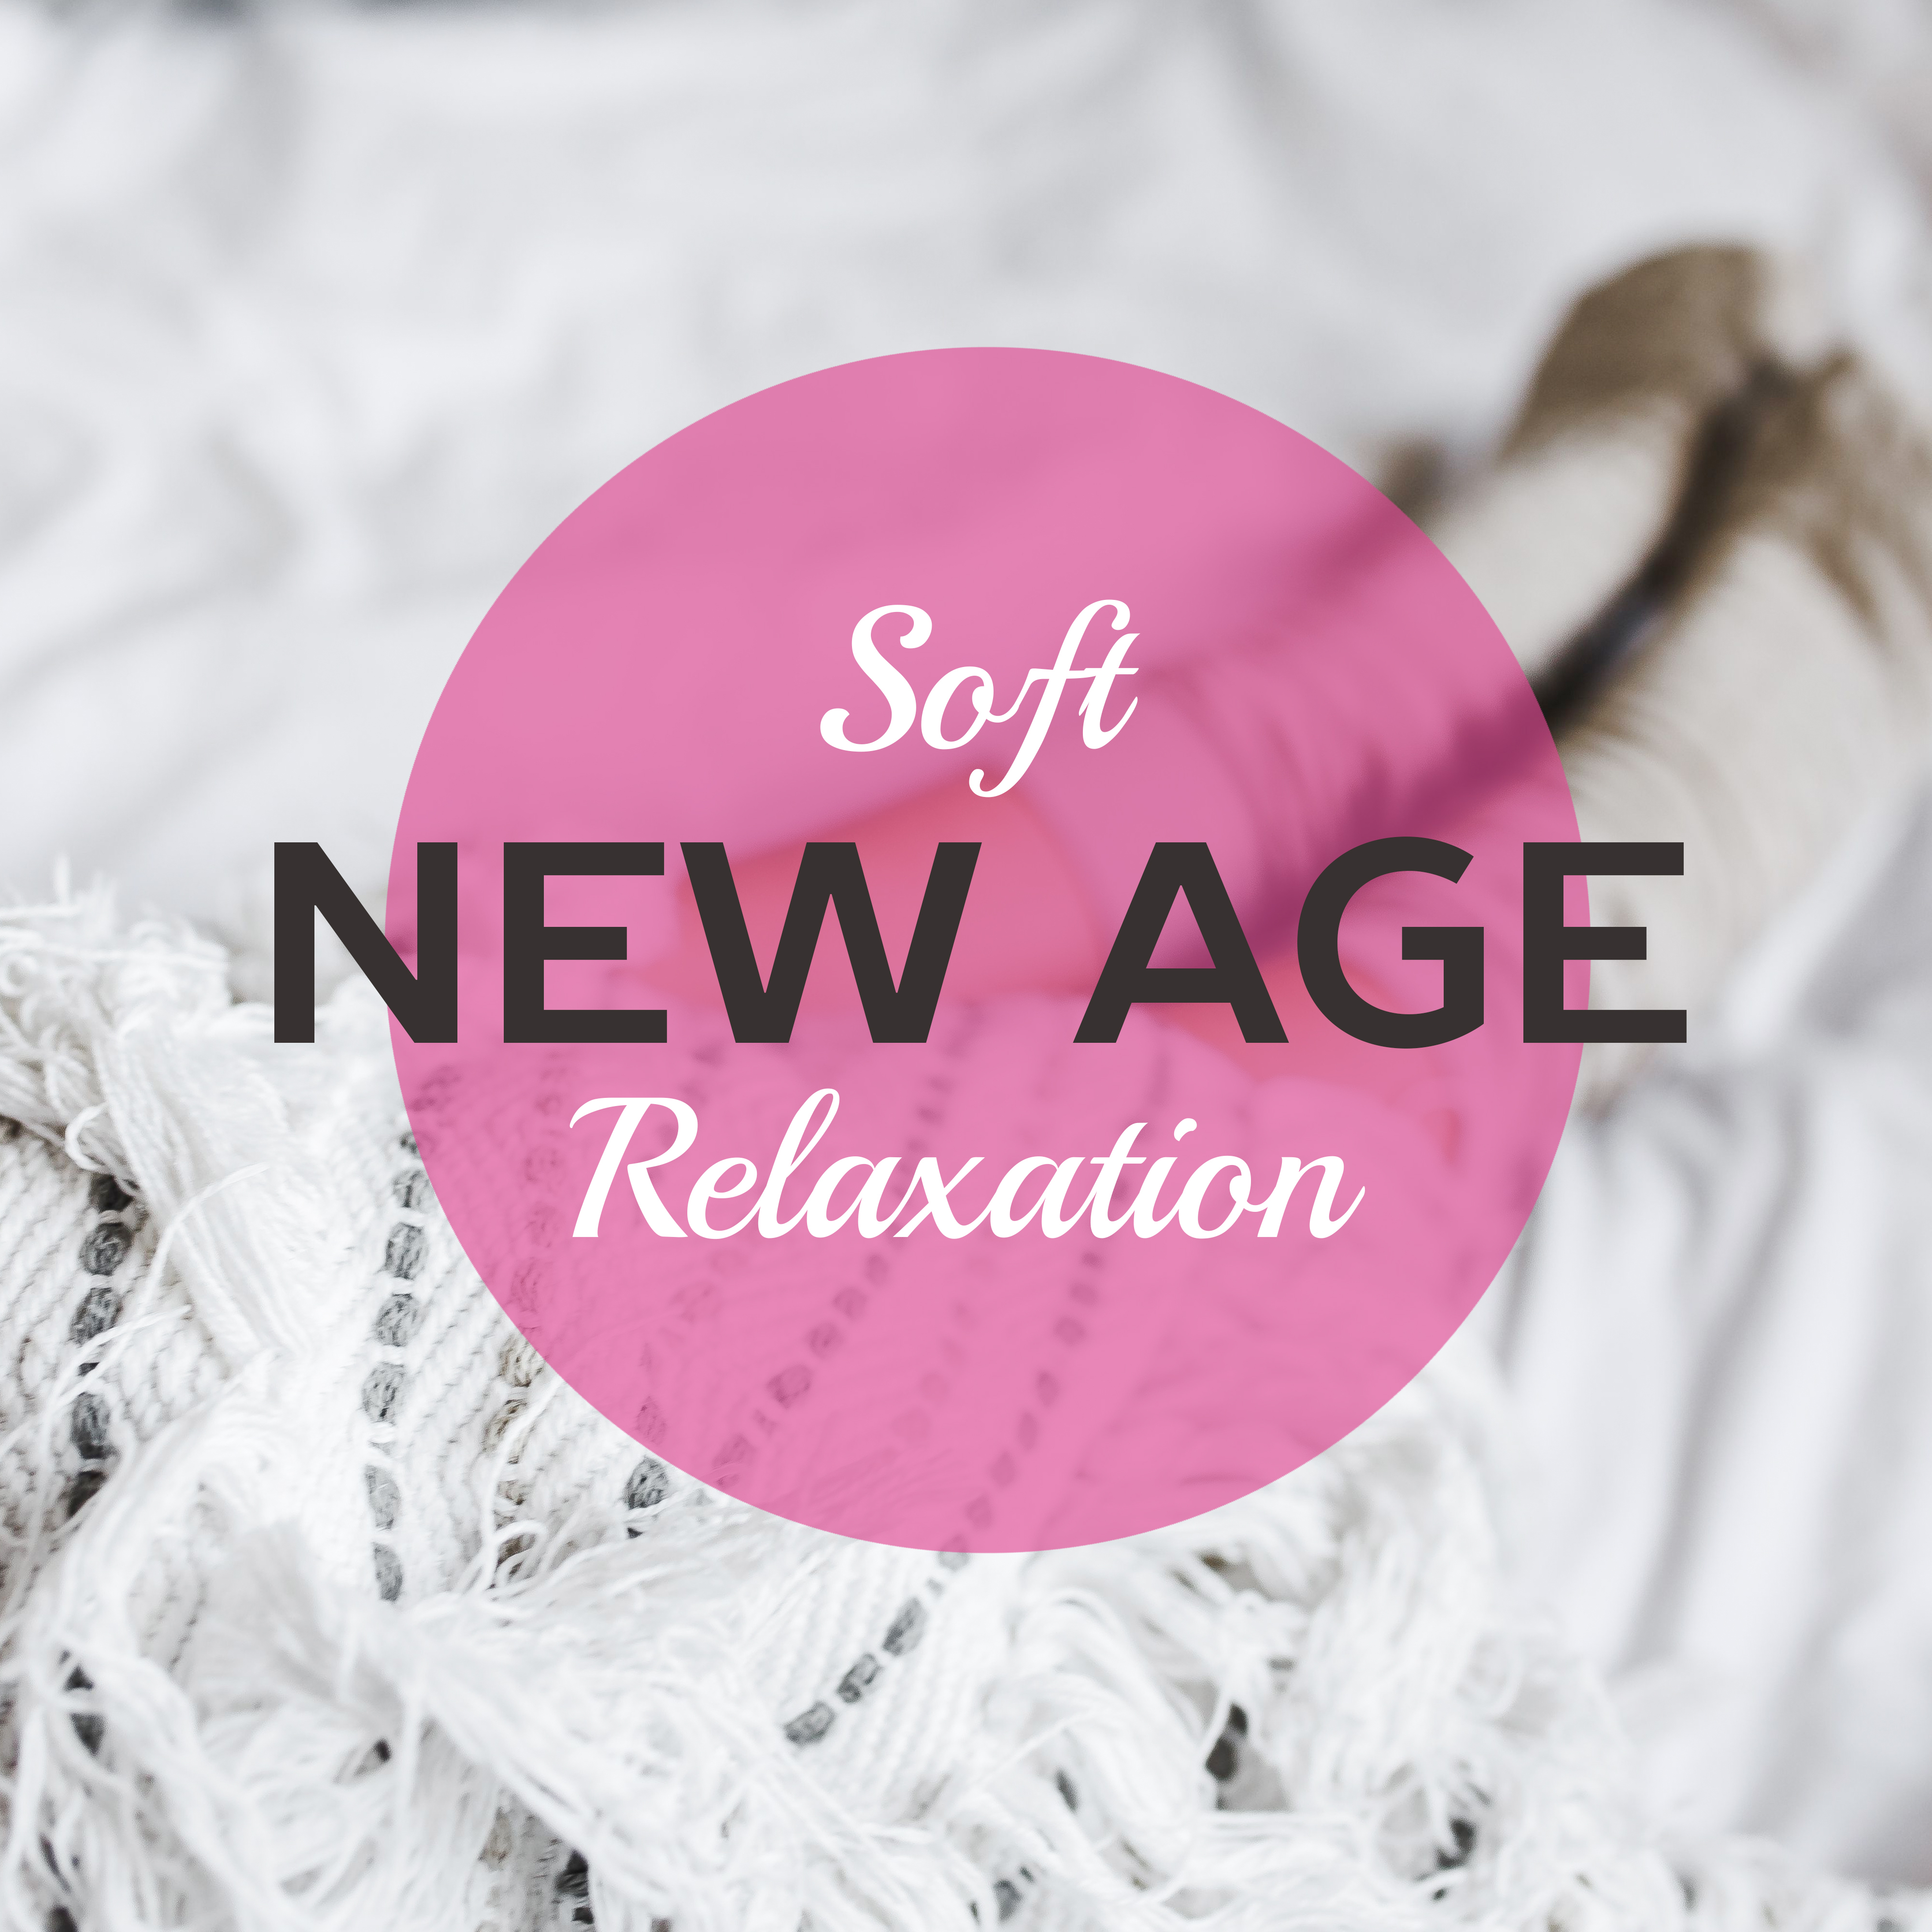 Soft New Age Relaxation